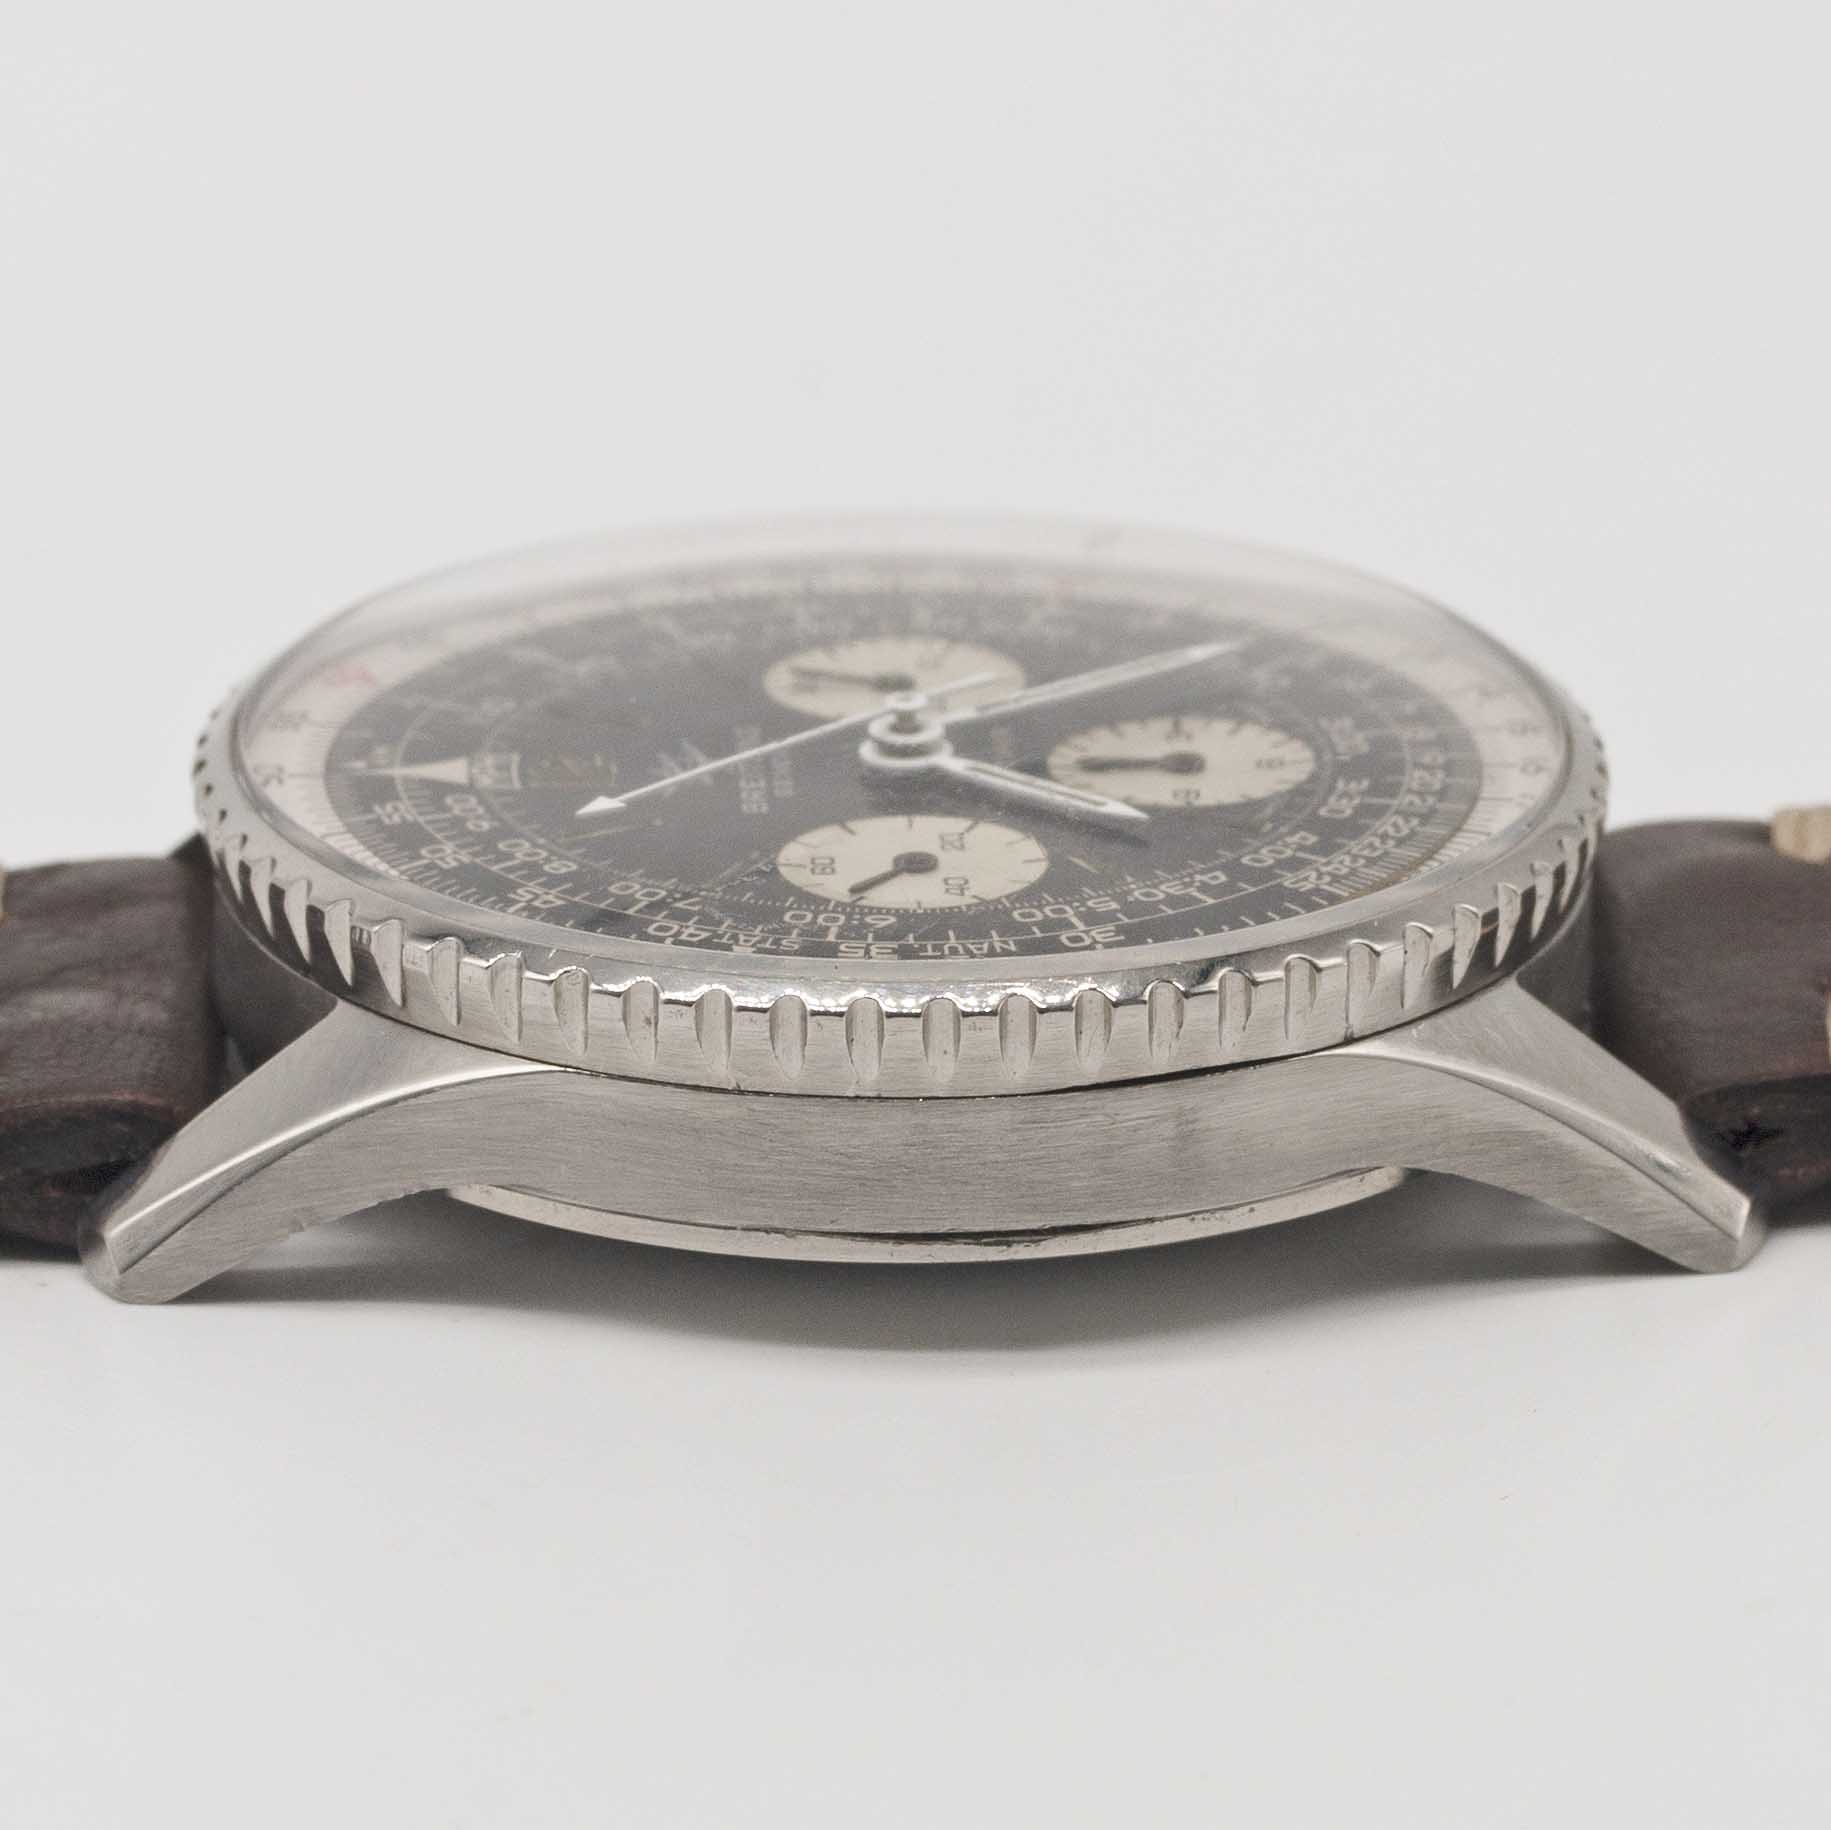 A GENTLEMAN'S STAINLESS STEEL BREITLING NAVITIMER CHRONOGRAPH WRIST WATCH CIRCA 1966, REF. 806 - Image 9 of 9